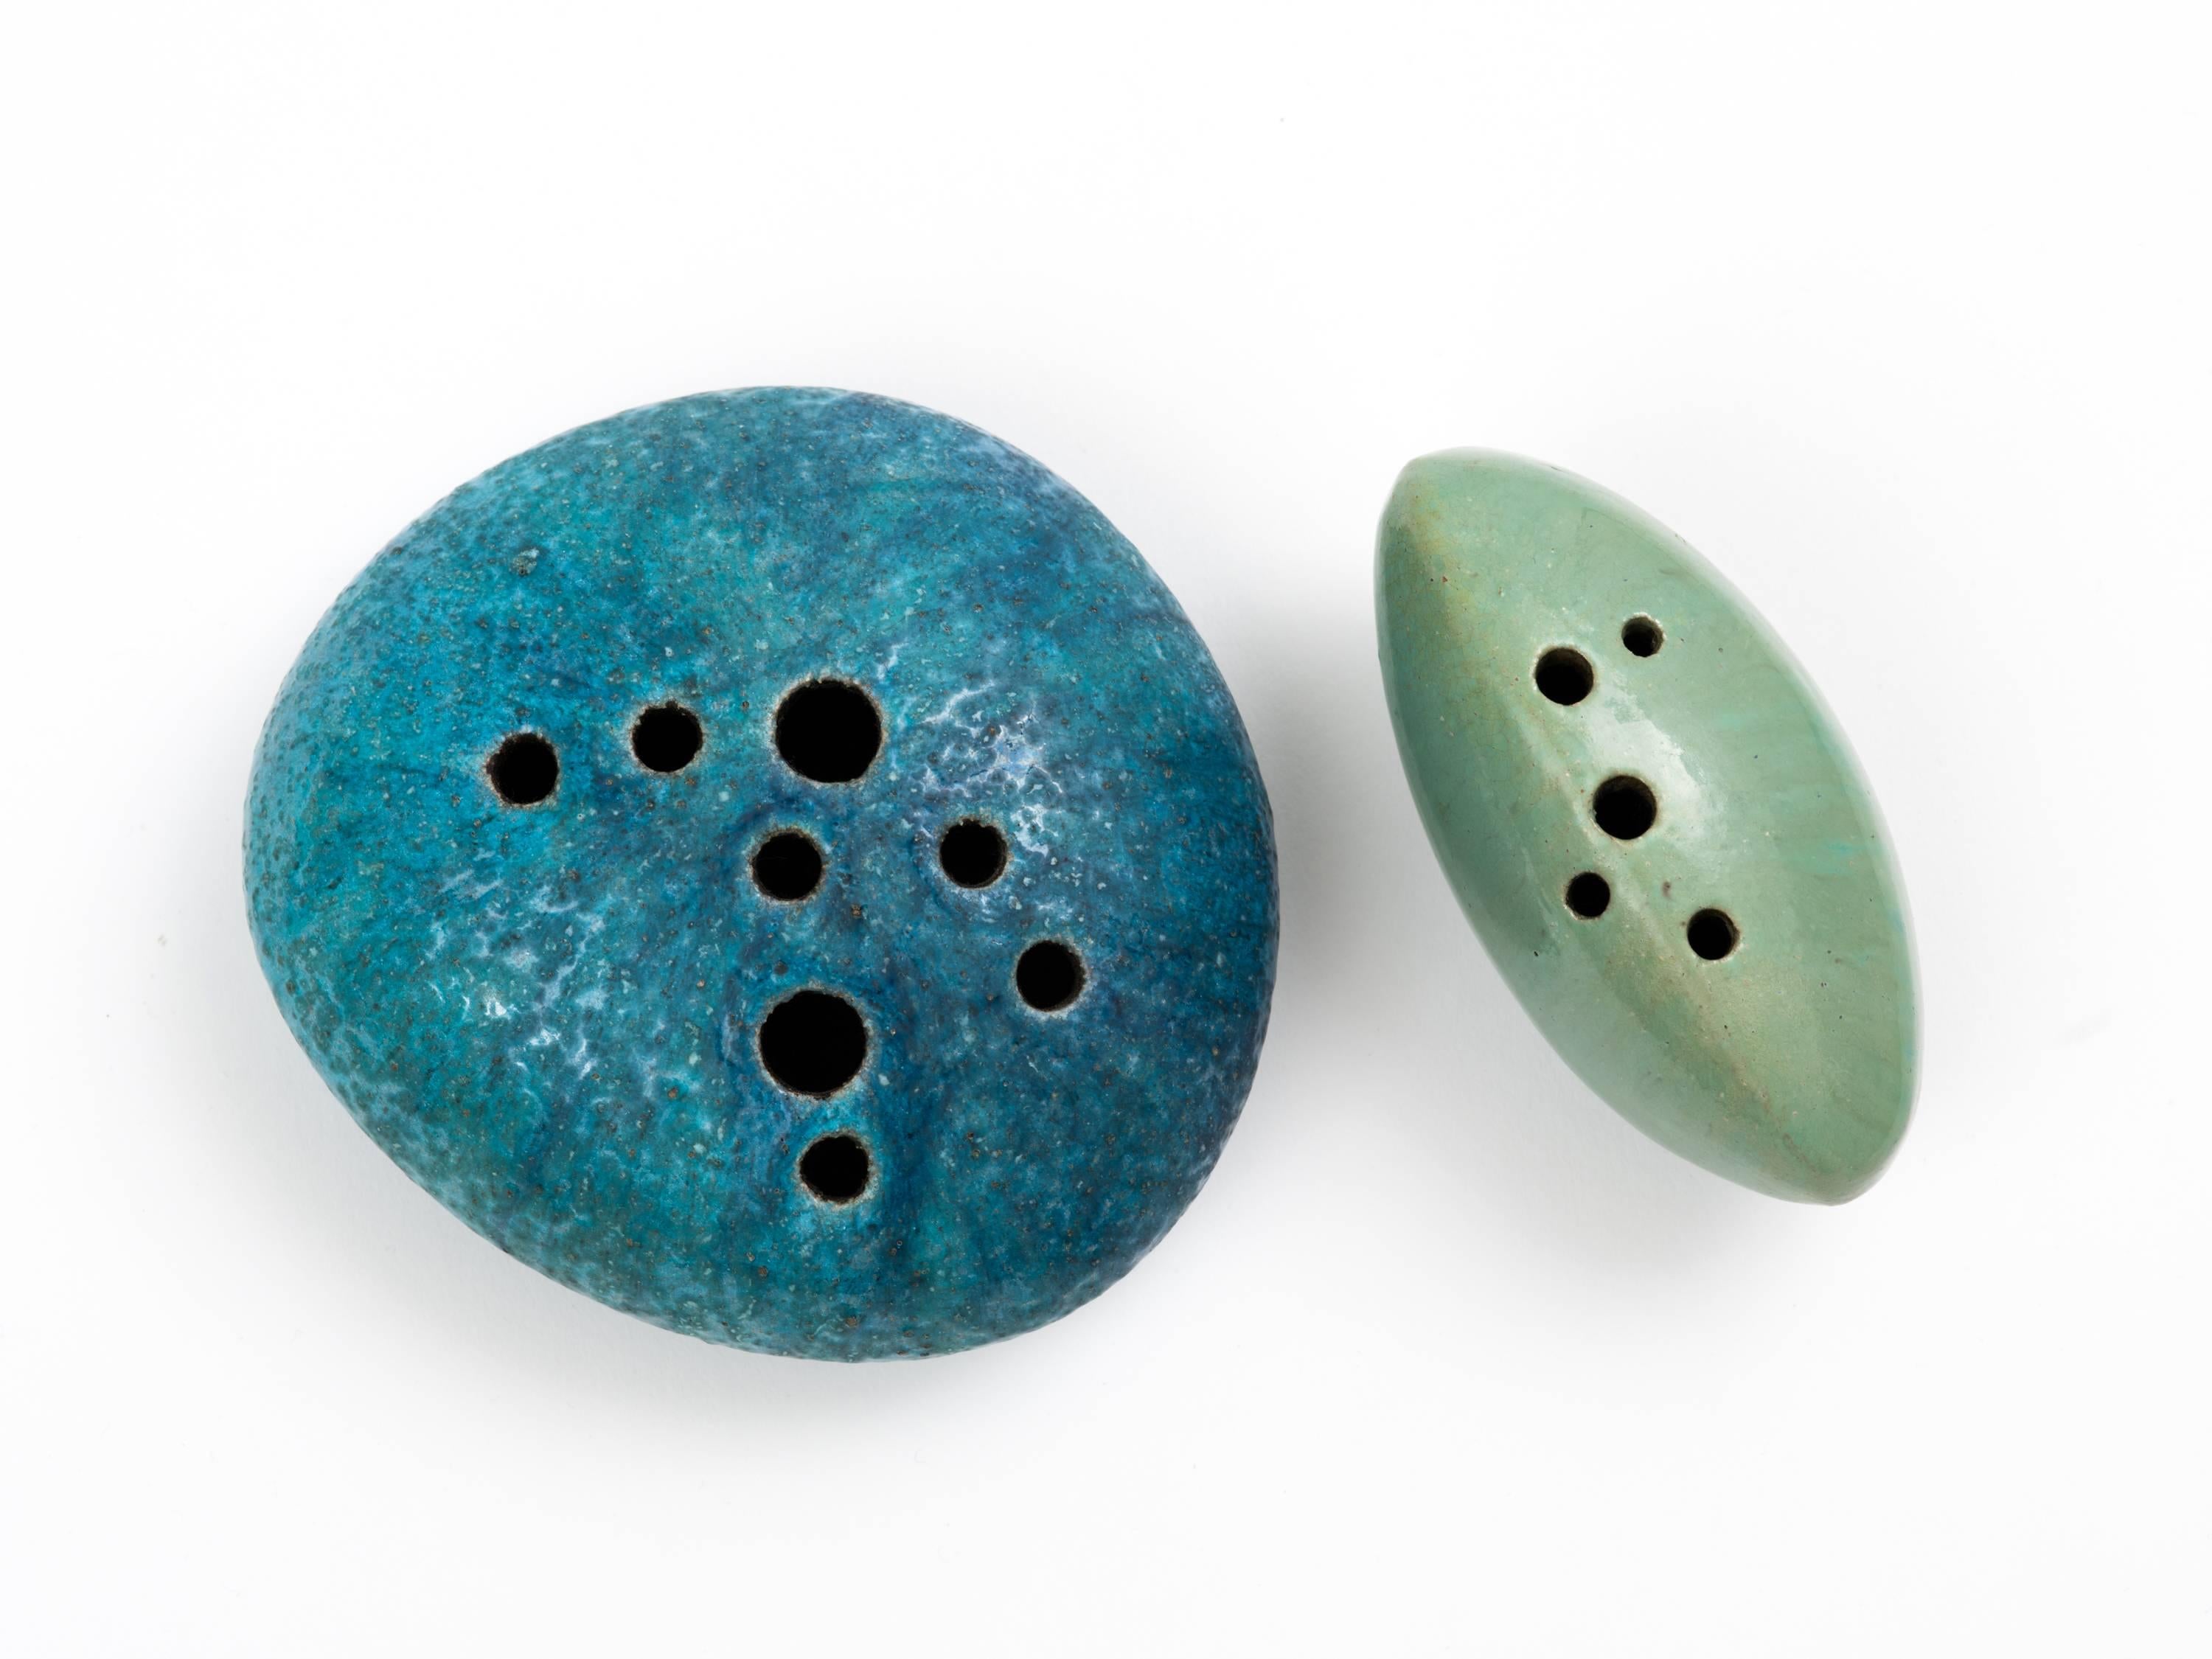 A pair of glazed earthenware Sassi (stones) sculptures in shades of Mediterranean blue and sea foam green by Renato Bassoli (1915-1982). Bassoli was a multi-disciplined artist with earlier career credits in both graphic and set design before moving